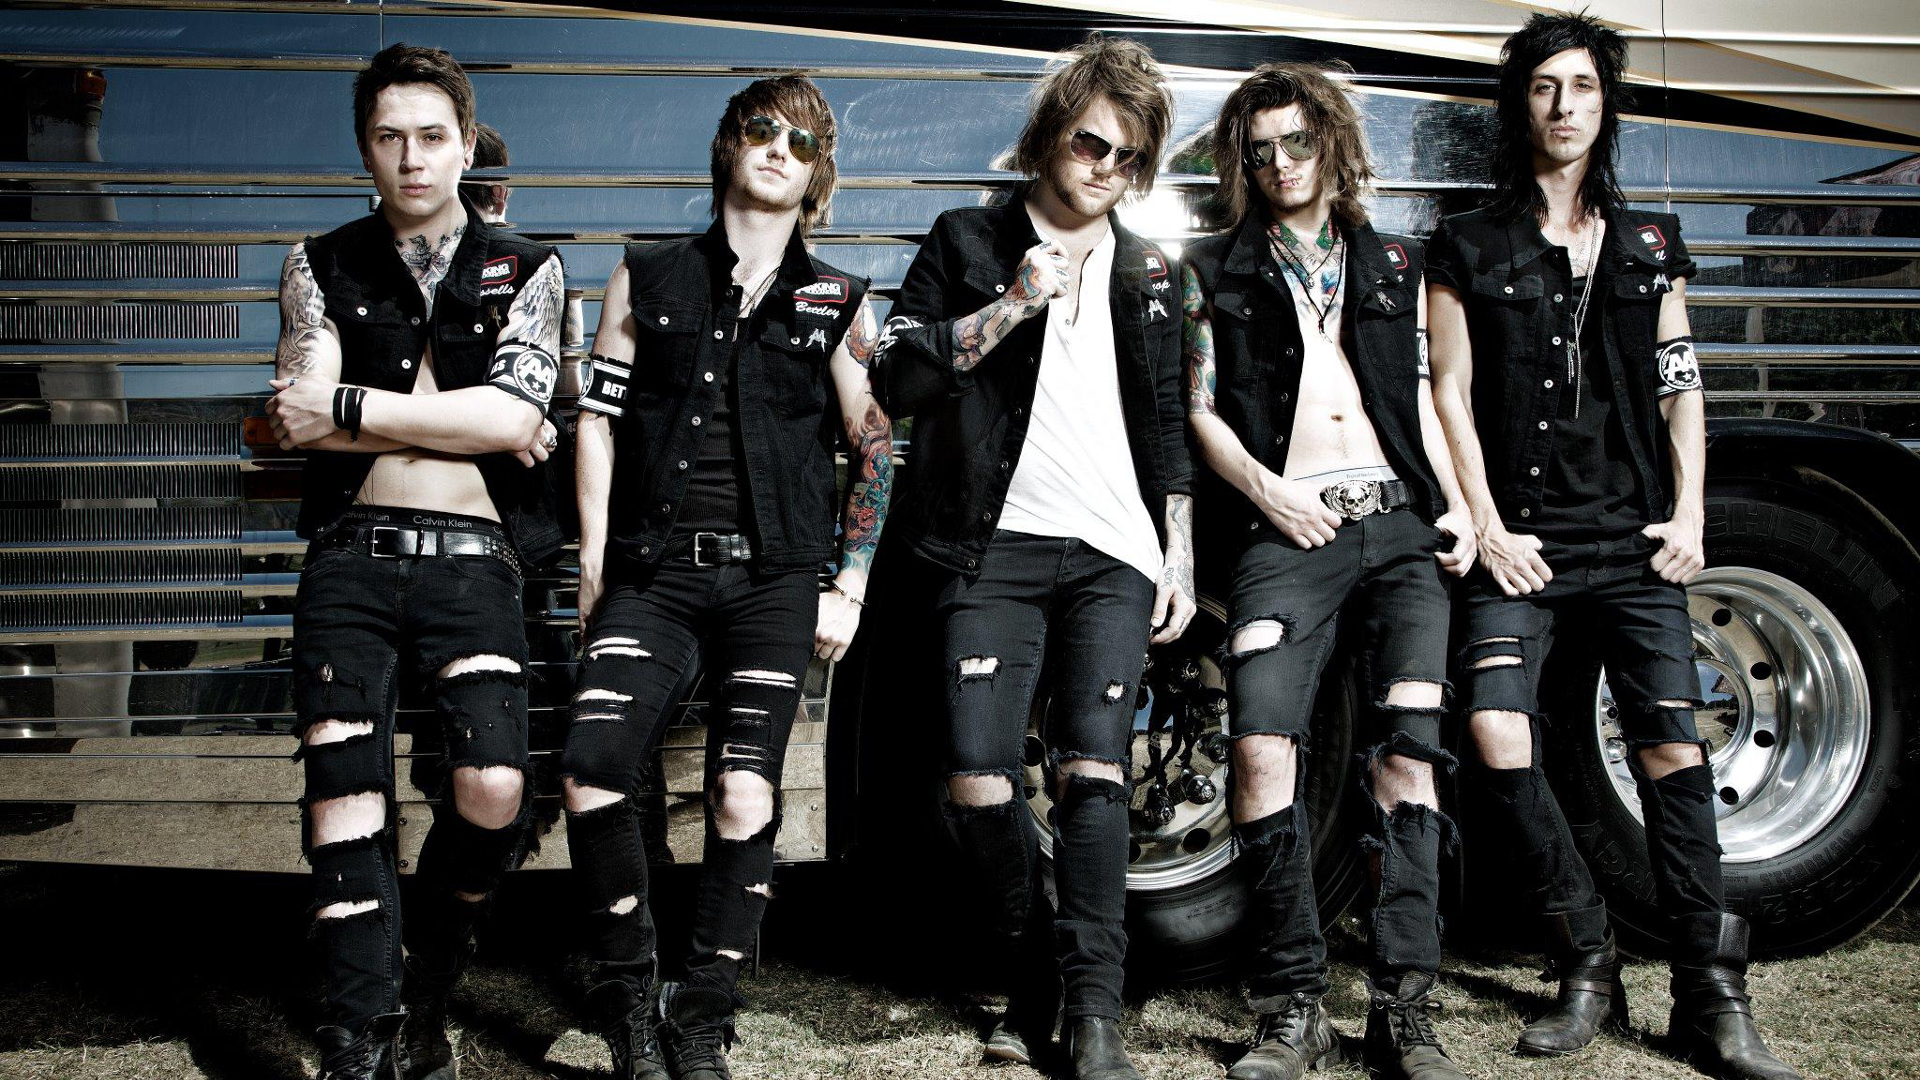 Gallery For Gt Asking Alexandria Reckless And Relentless